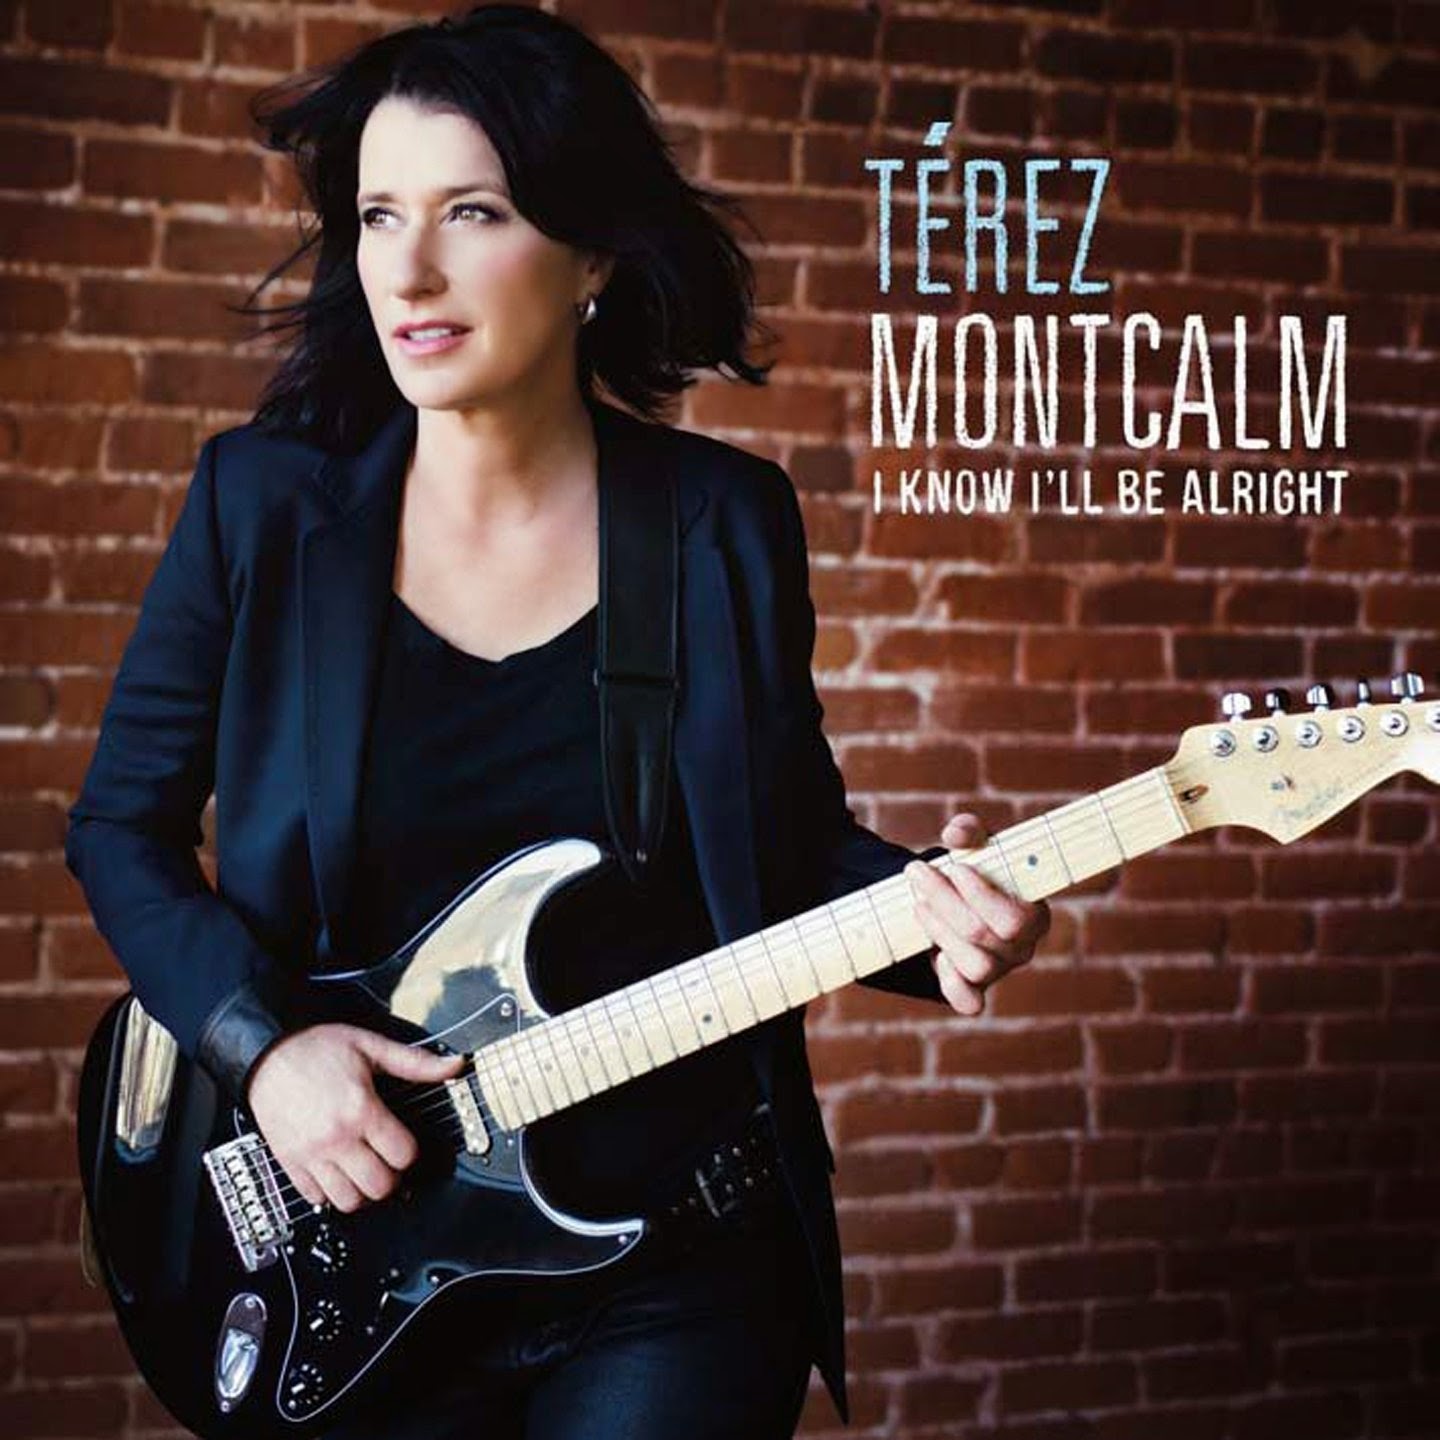 TÉREZ MONTCALM - I Know I'll Be Alright cover 